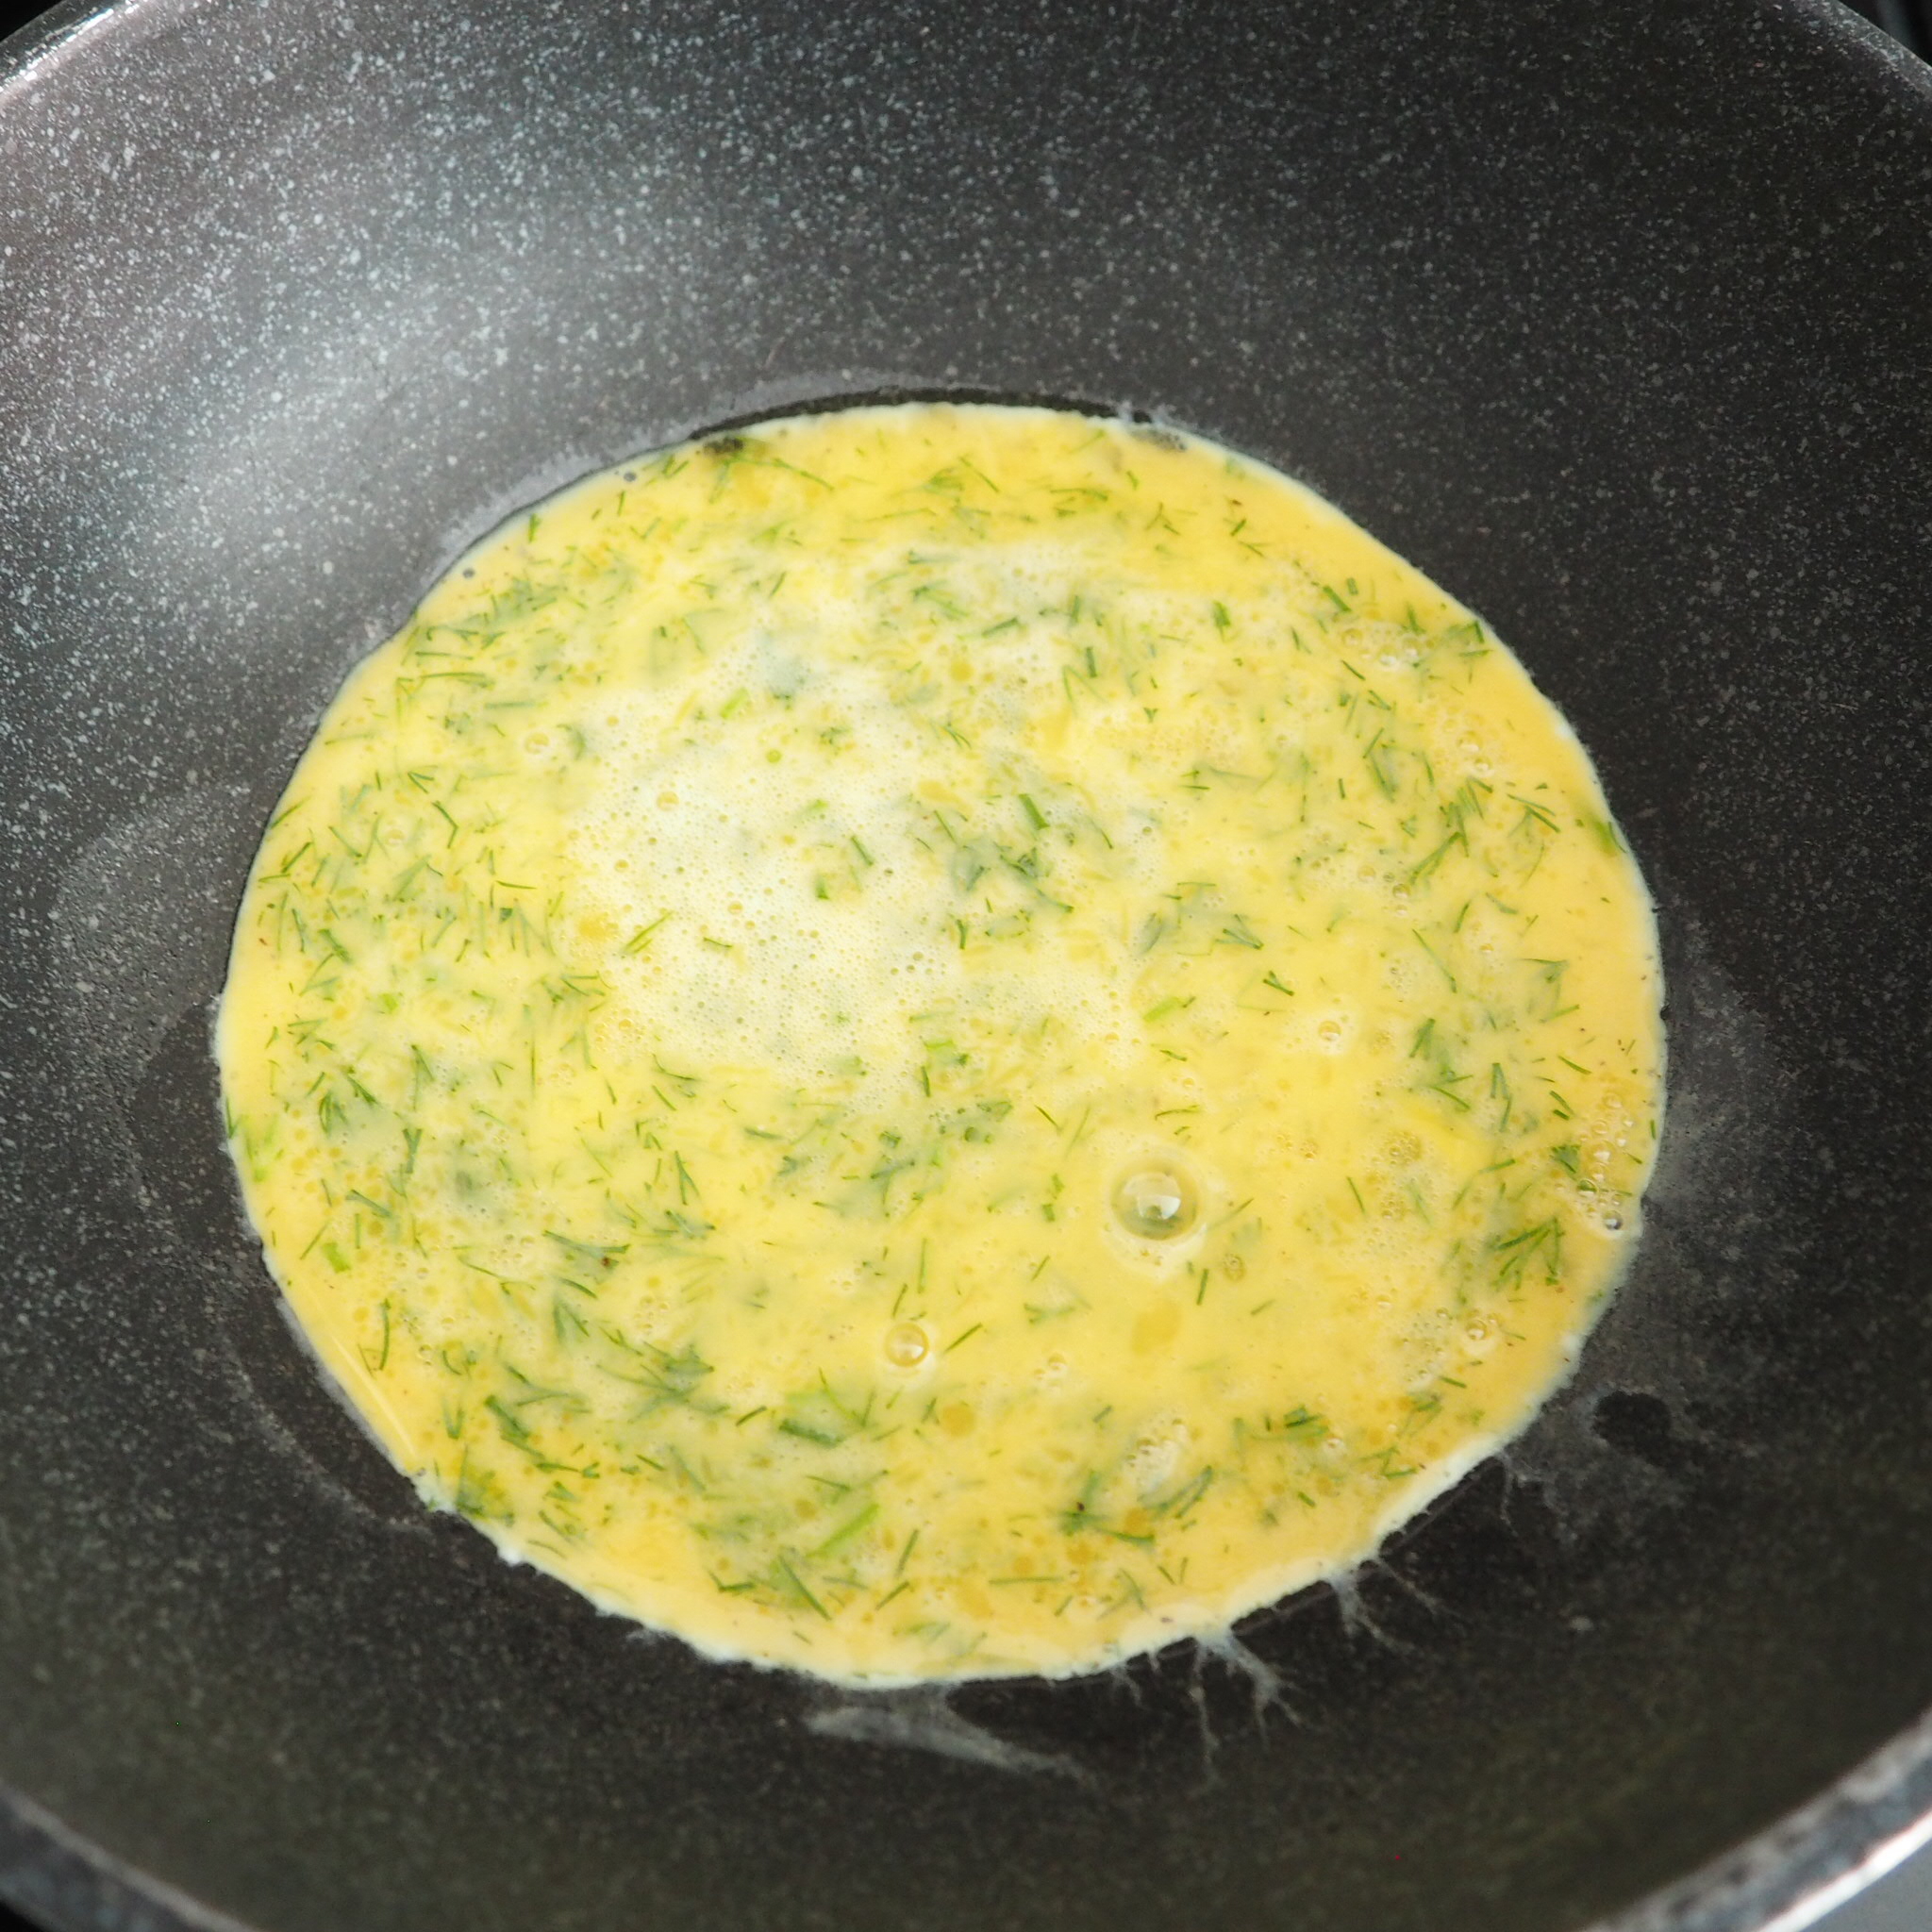  Step 3: On a pan set on medium heat, pour in your scrambled eggs 